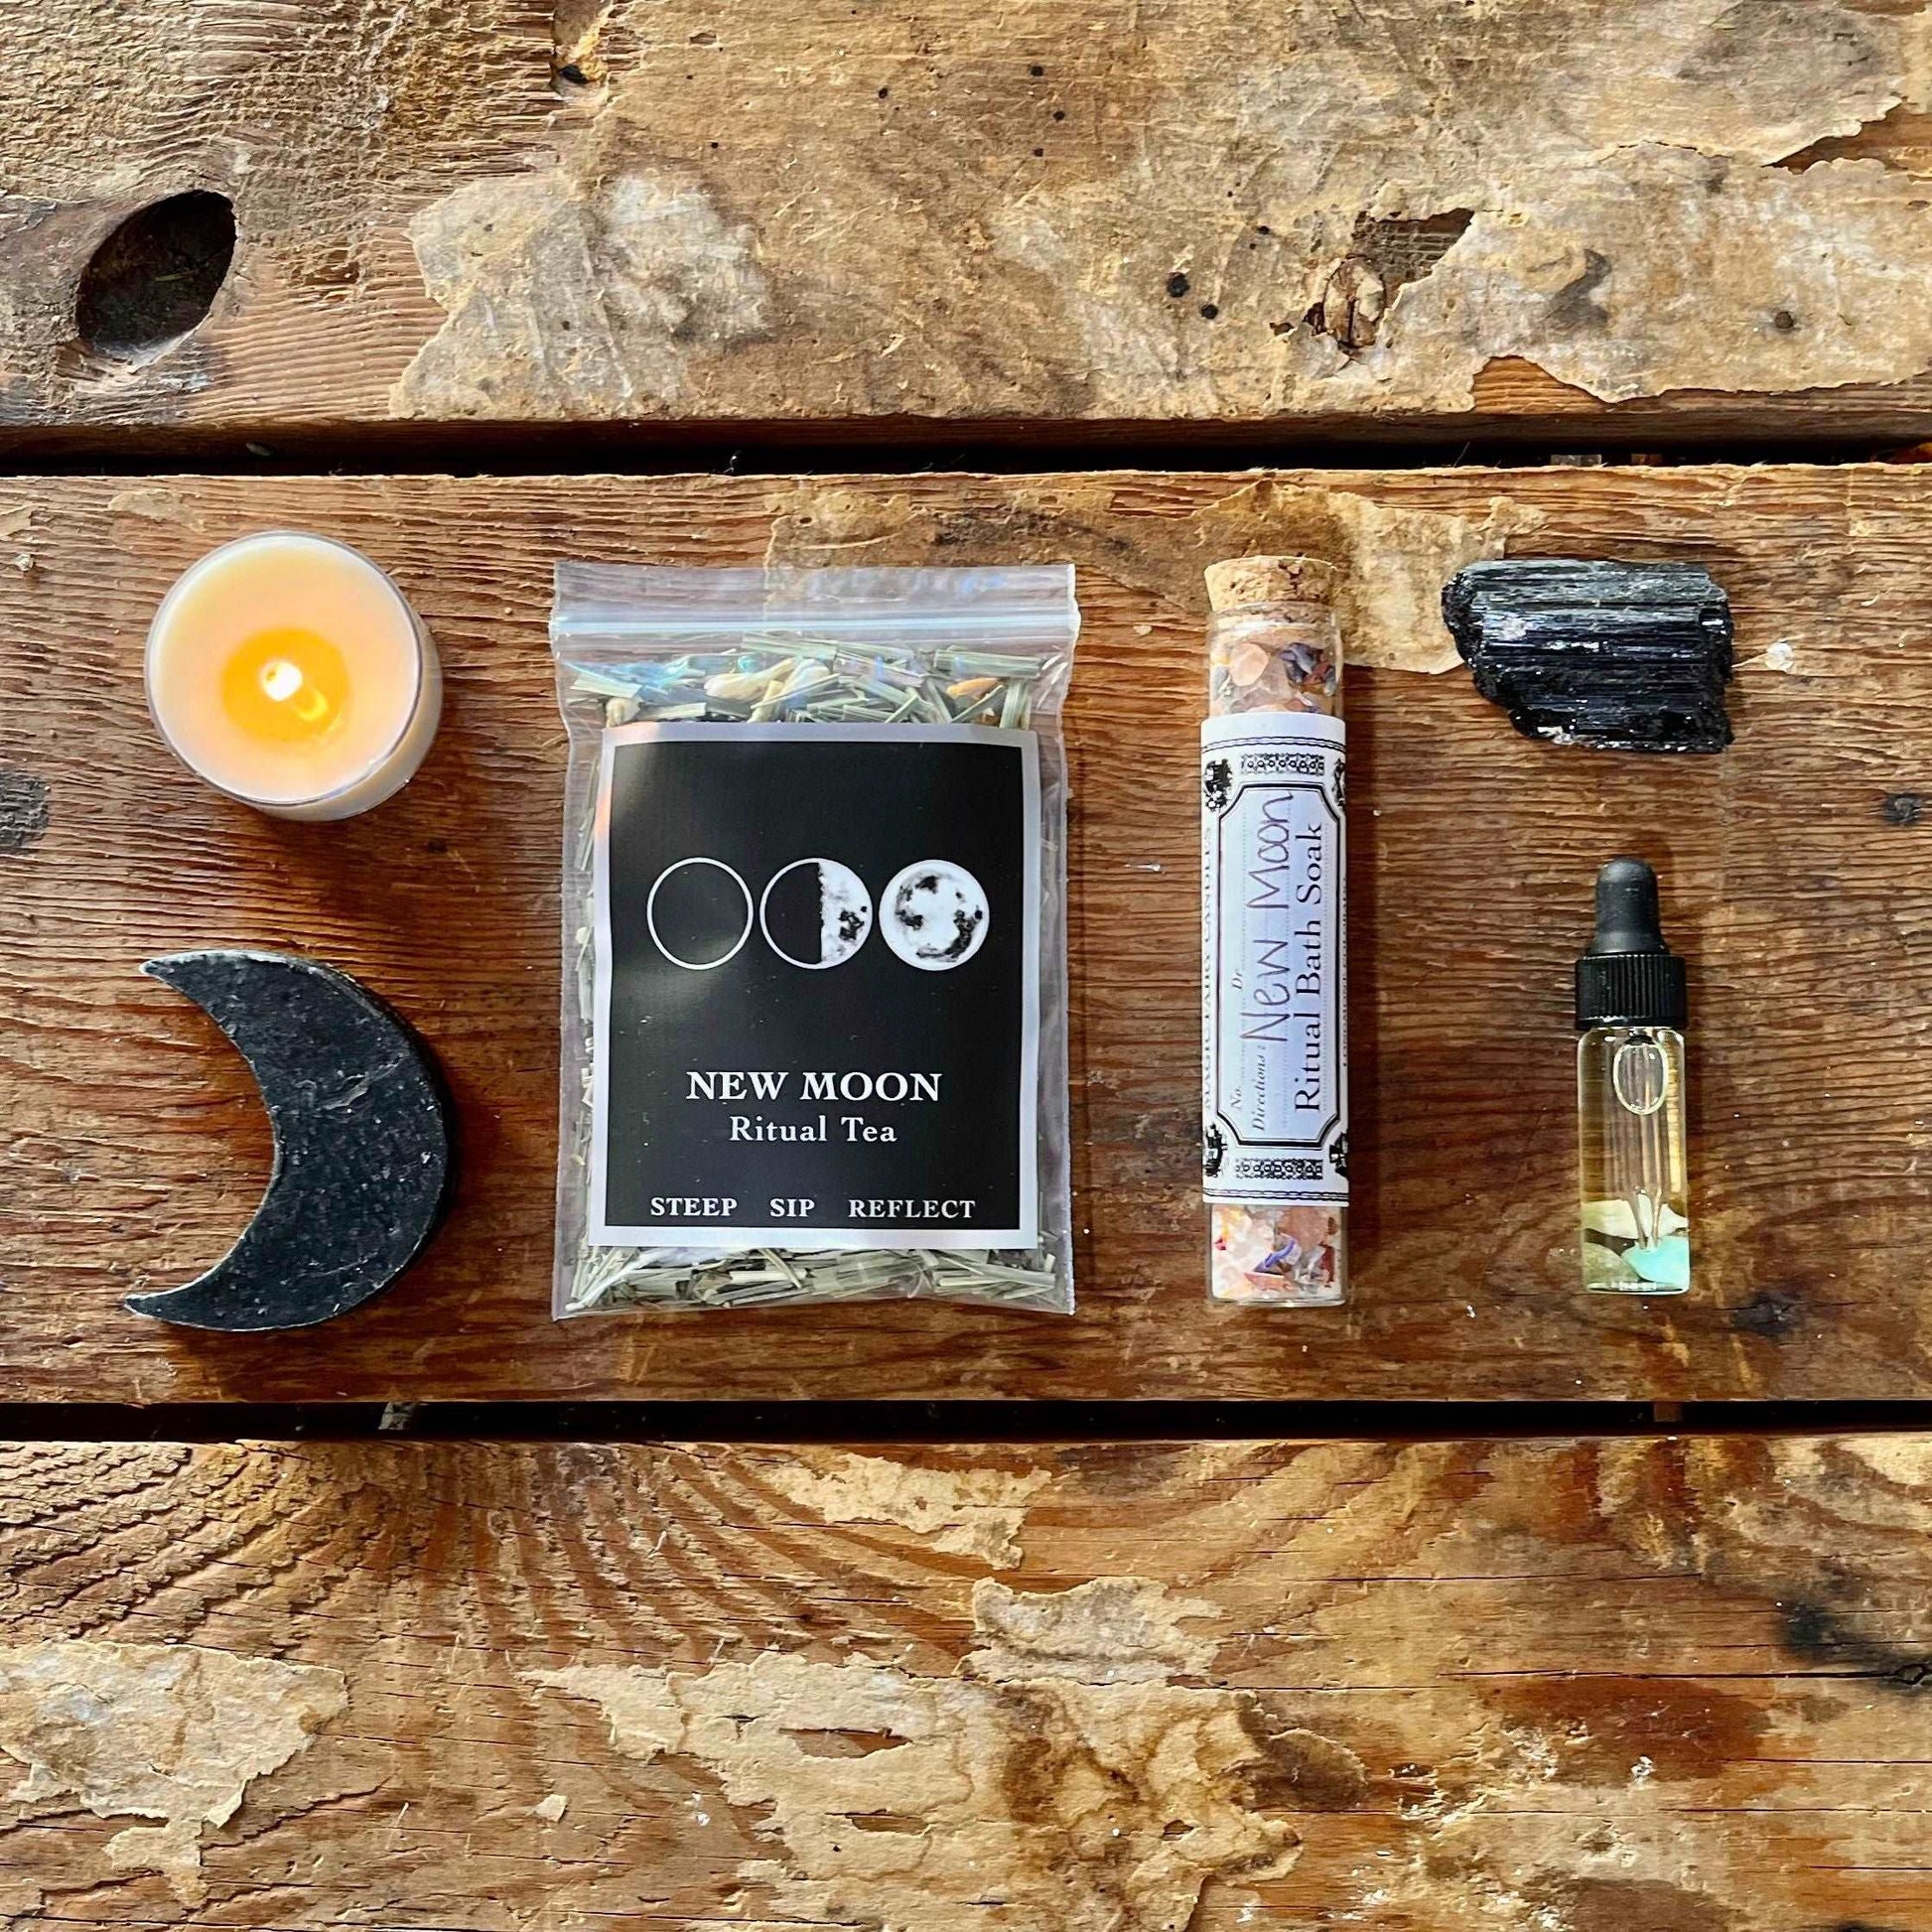 Embrace the potential of our New Moon Intention Ritual Kit. Ignite your intentions with a New Moon Intention Tea Light, indulge in self-care with New Moon Salt & Charcoal Goat's Milk Soap and Salt Soak, and set the mood with New Moon Essential Oil. Ground your energy with Rough Black Tourmaline, sip on New Moon Ritual Tea, and follow guidance from the New Moon Ritual Booklet. Welcome the lunar energy and manifest your intentions with this curated kit.